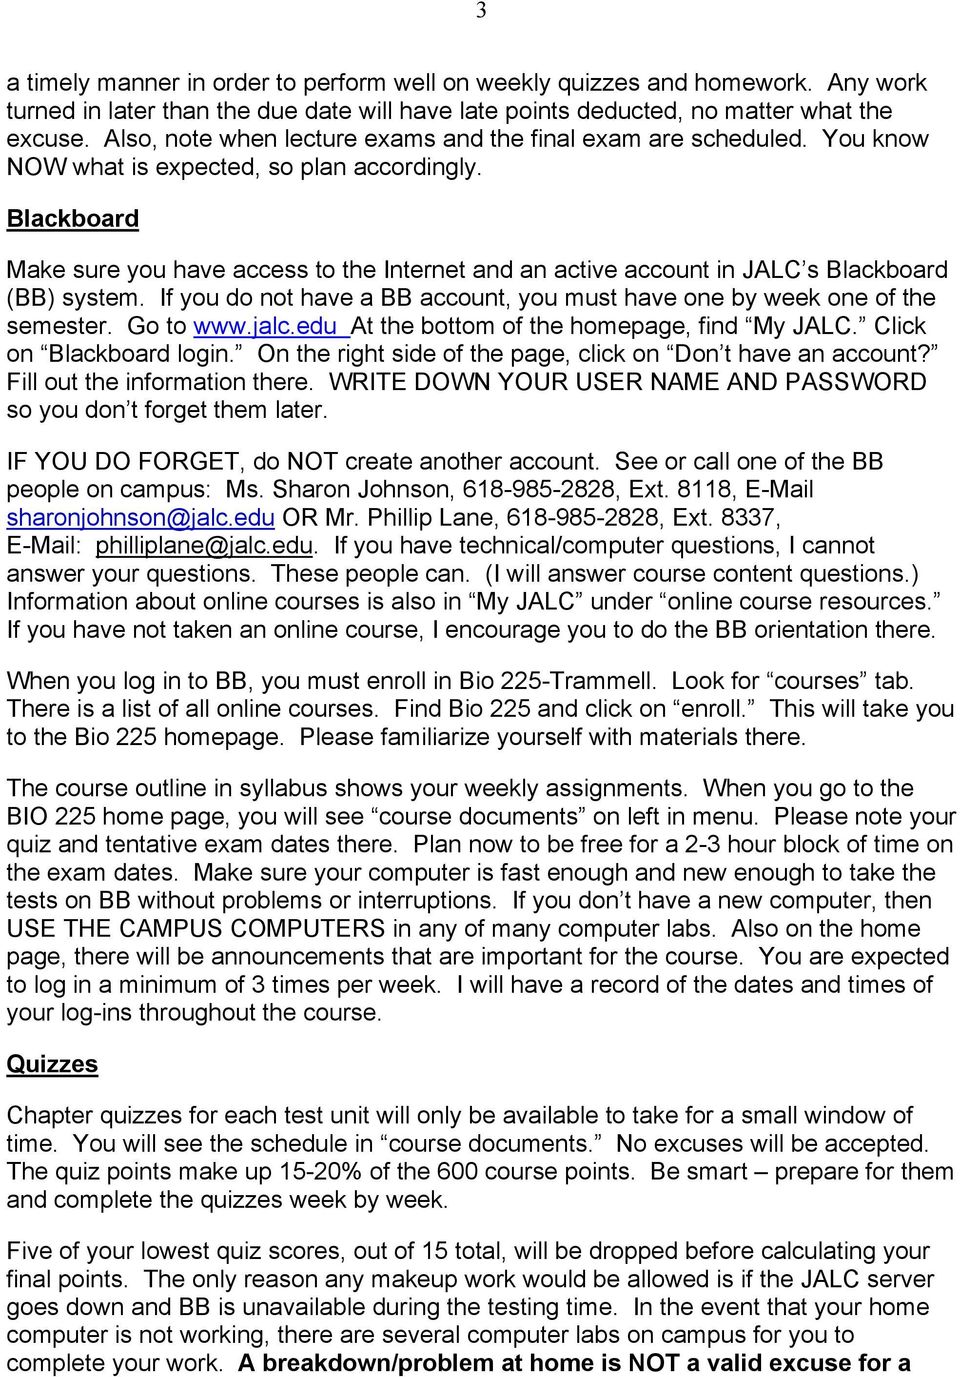 Blackboard Make sure you have access to the Internet and an active account in JALC s Blackboard (BB) system. If you do not have a BB account, you must have one by week one of the semester. Go to www.